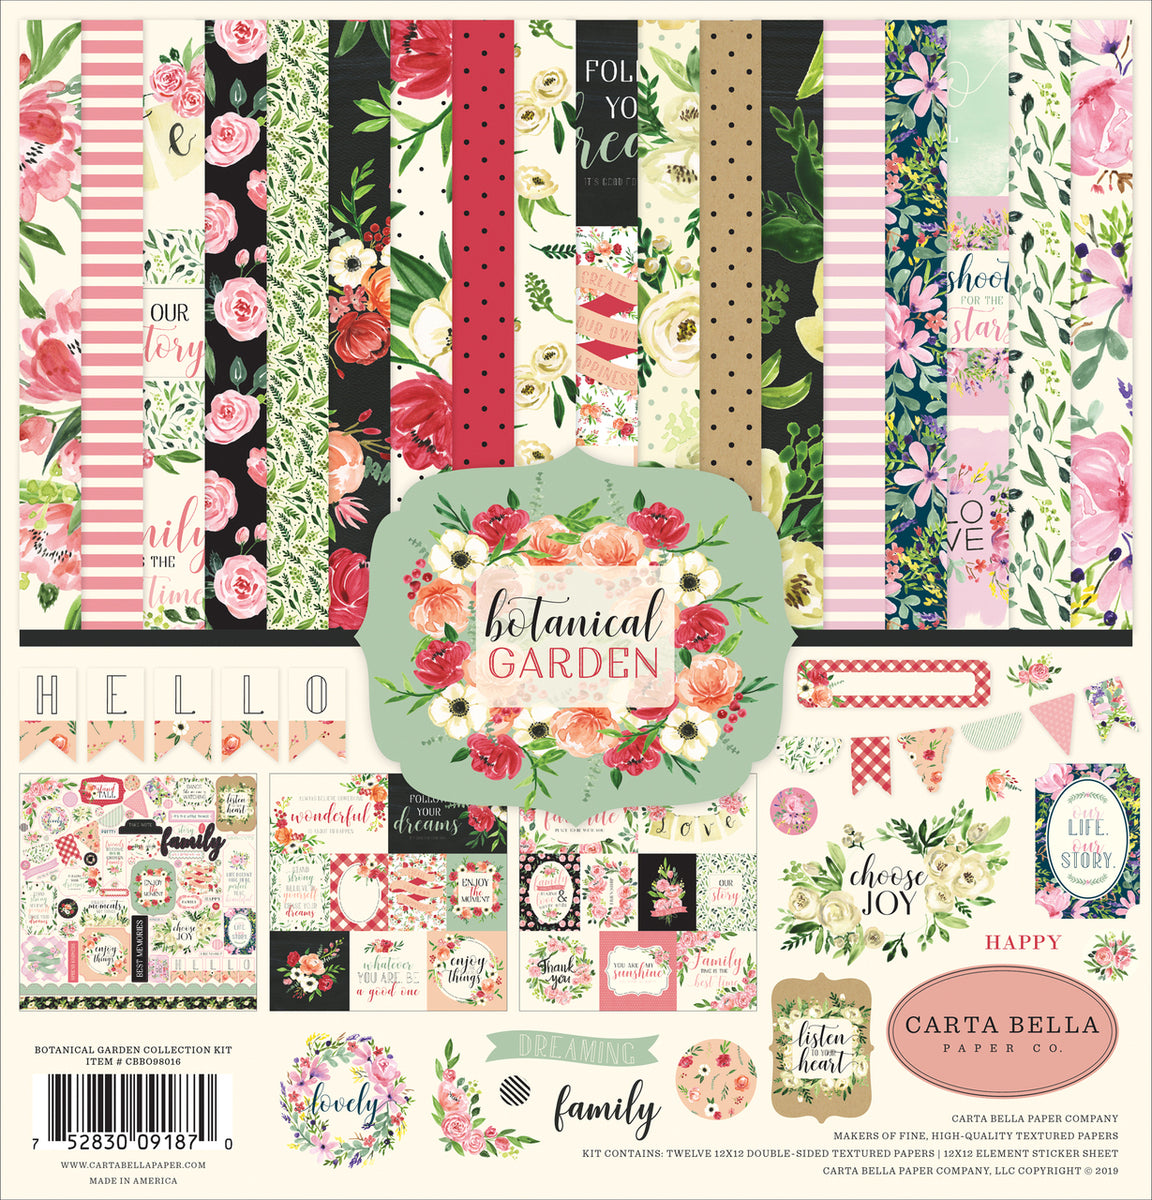 Botanical Garden 12x12 collection kit with 12 beautiful floral patterned papers - Carta Bella Paper